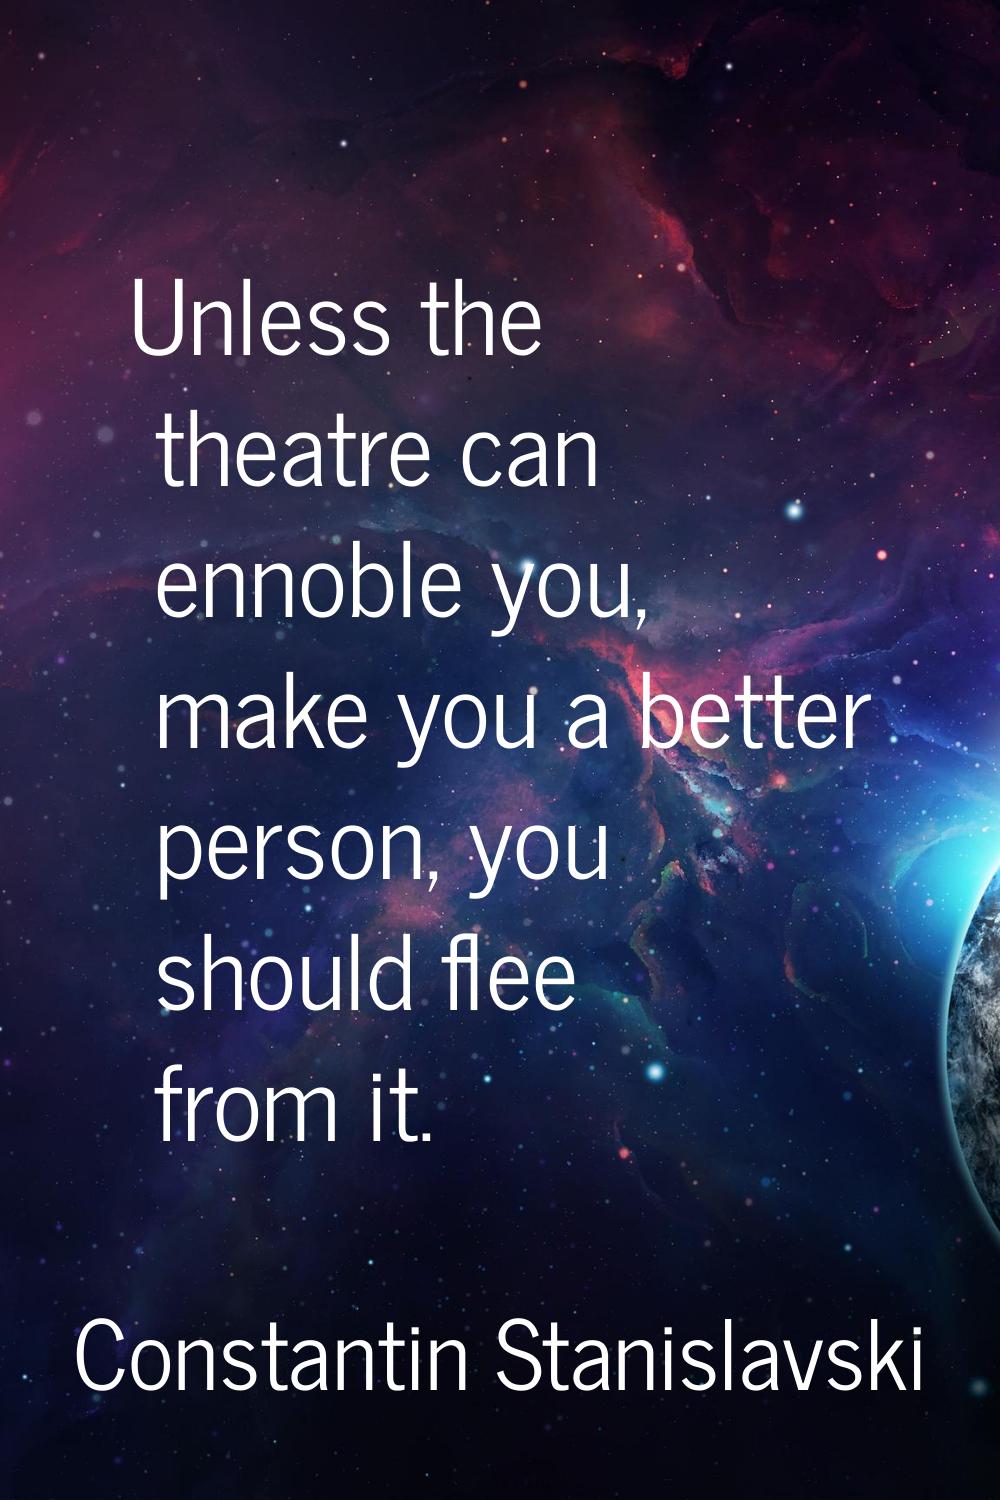 Unless the theatre can ennoble you, make you a better person, you should flee from it.